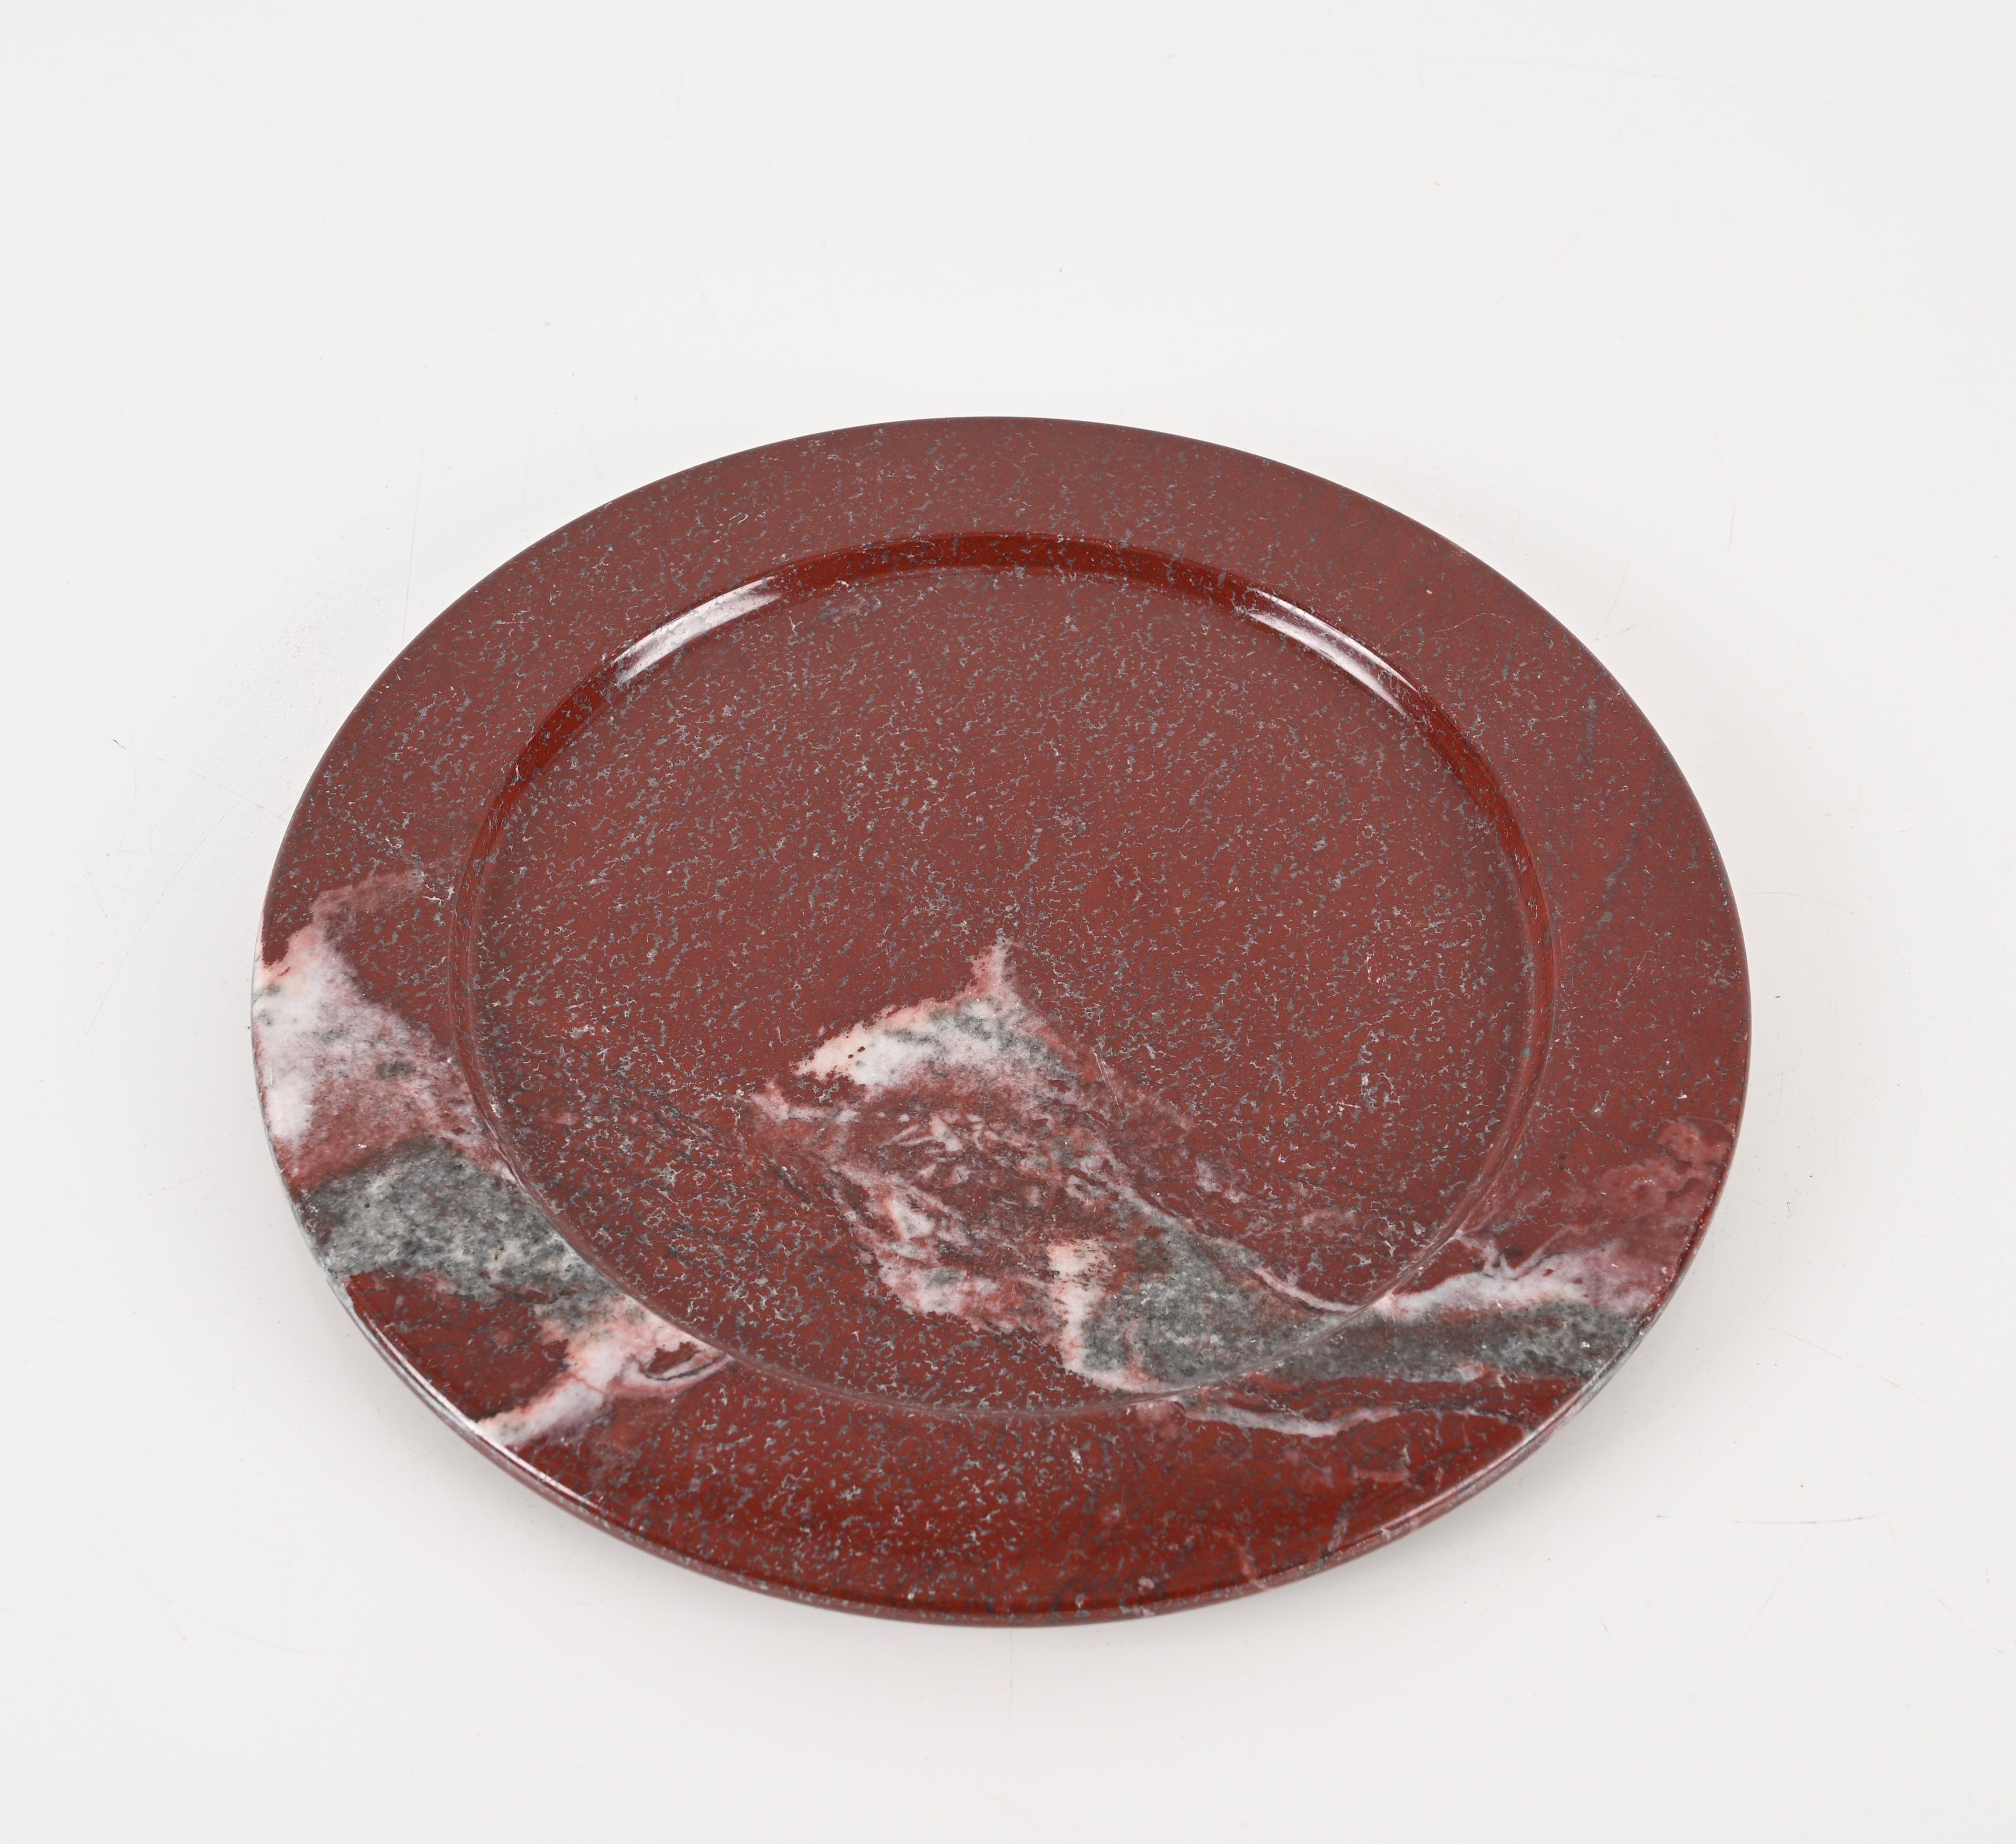 Magnificent solid dark red Porphyry marble plate made in Italy during the 1950s.

The simplicity of this plate enhances the quality of the marble used on this object, which is astonishing. In Ancient Rome the phorphyry marble was used in nobles